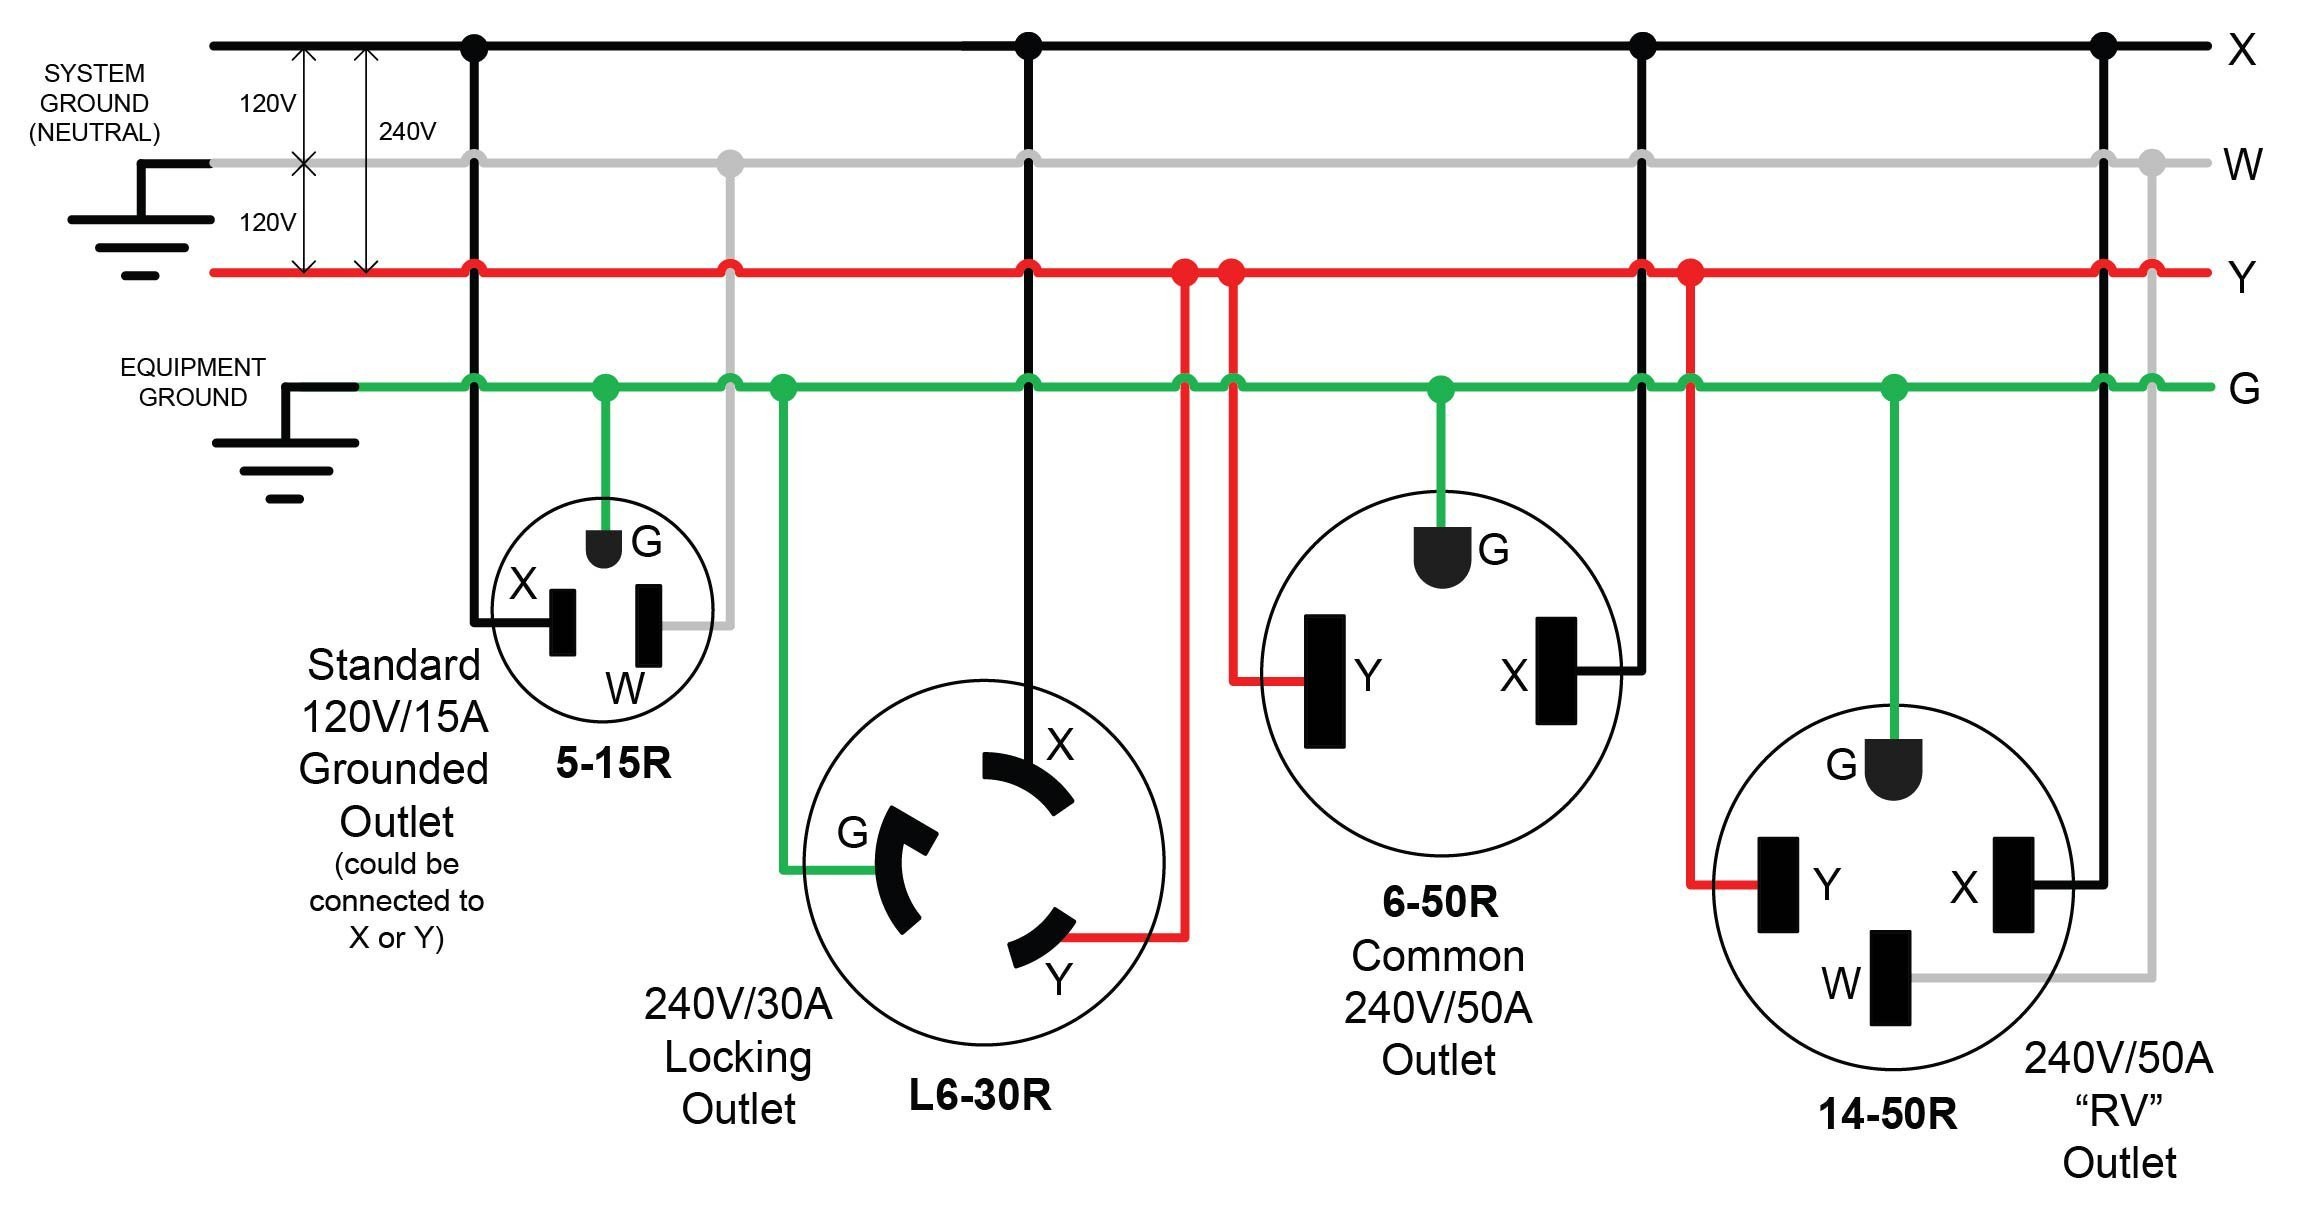 Generous How To Wire 240v Outlet s Wiring Schematics And Throughout Nema 6 50r Diagram